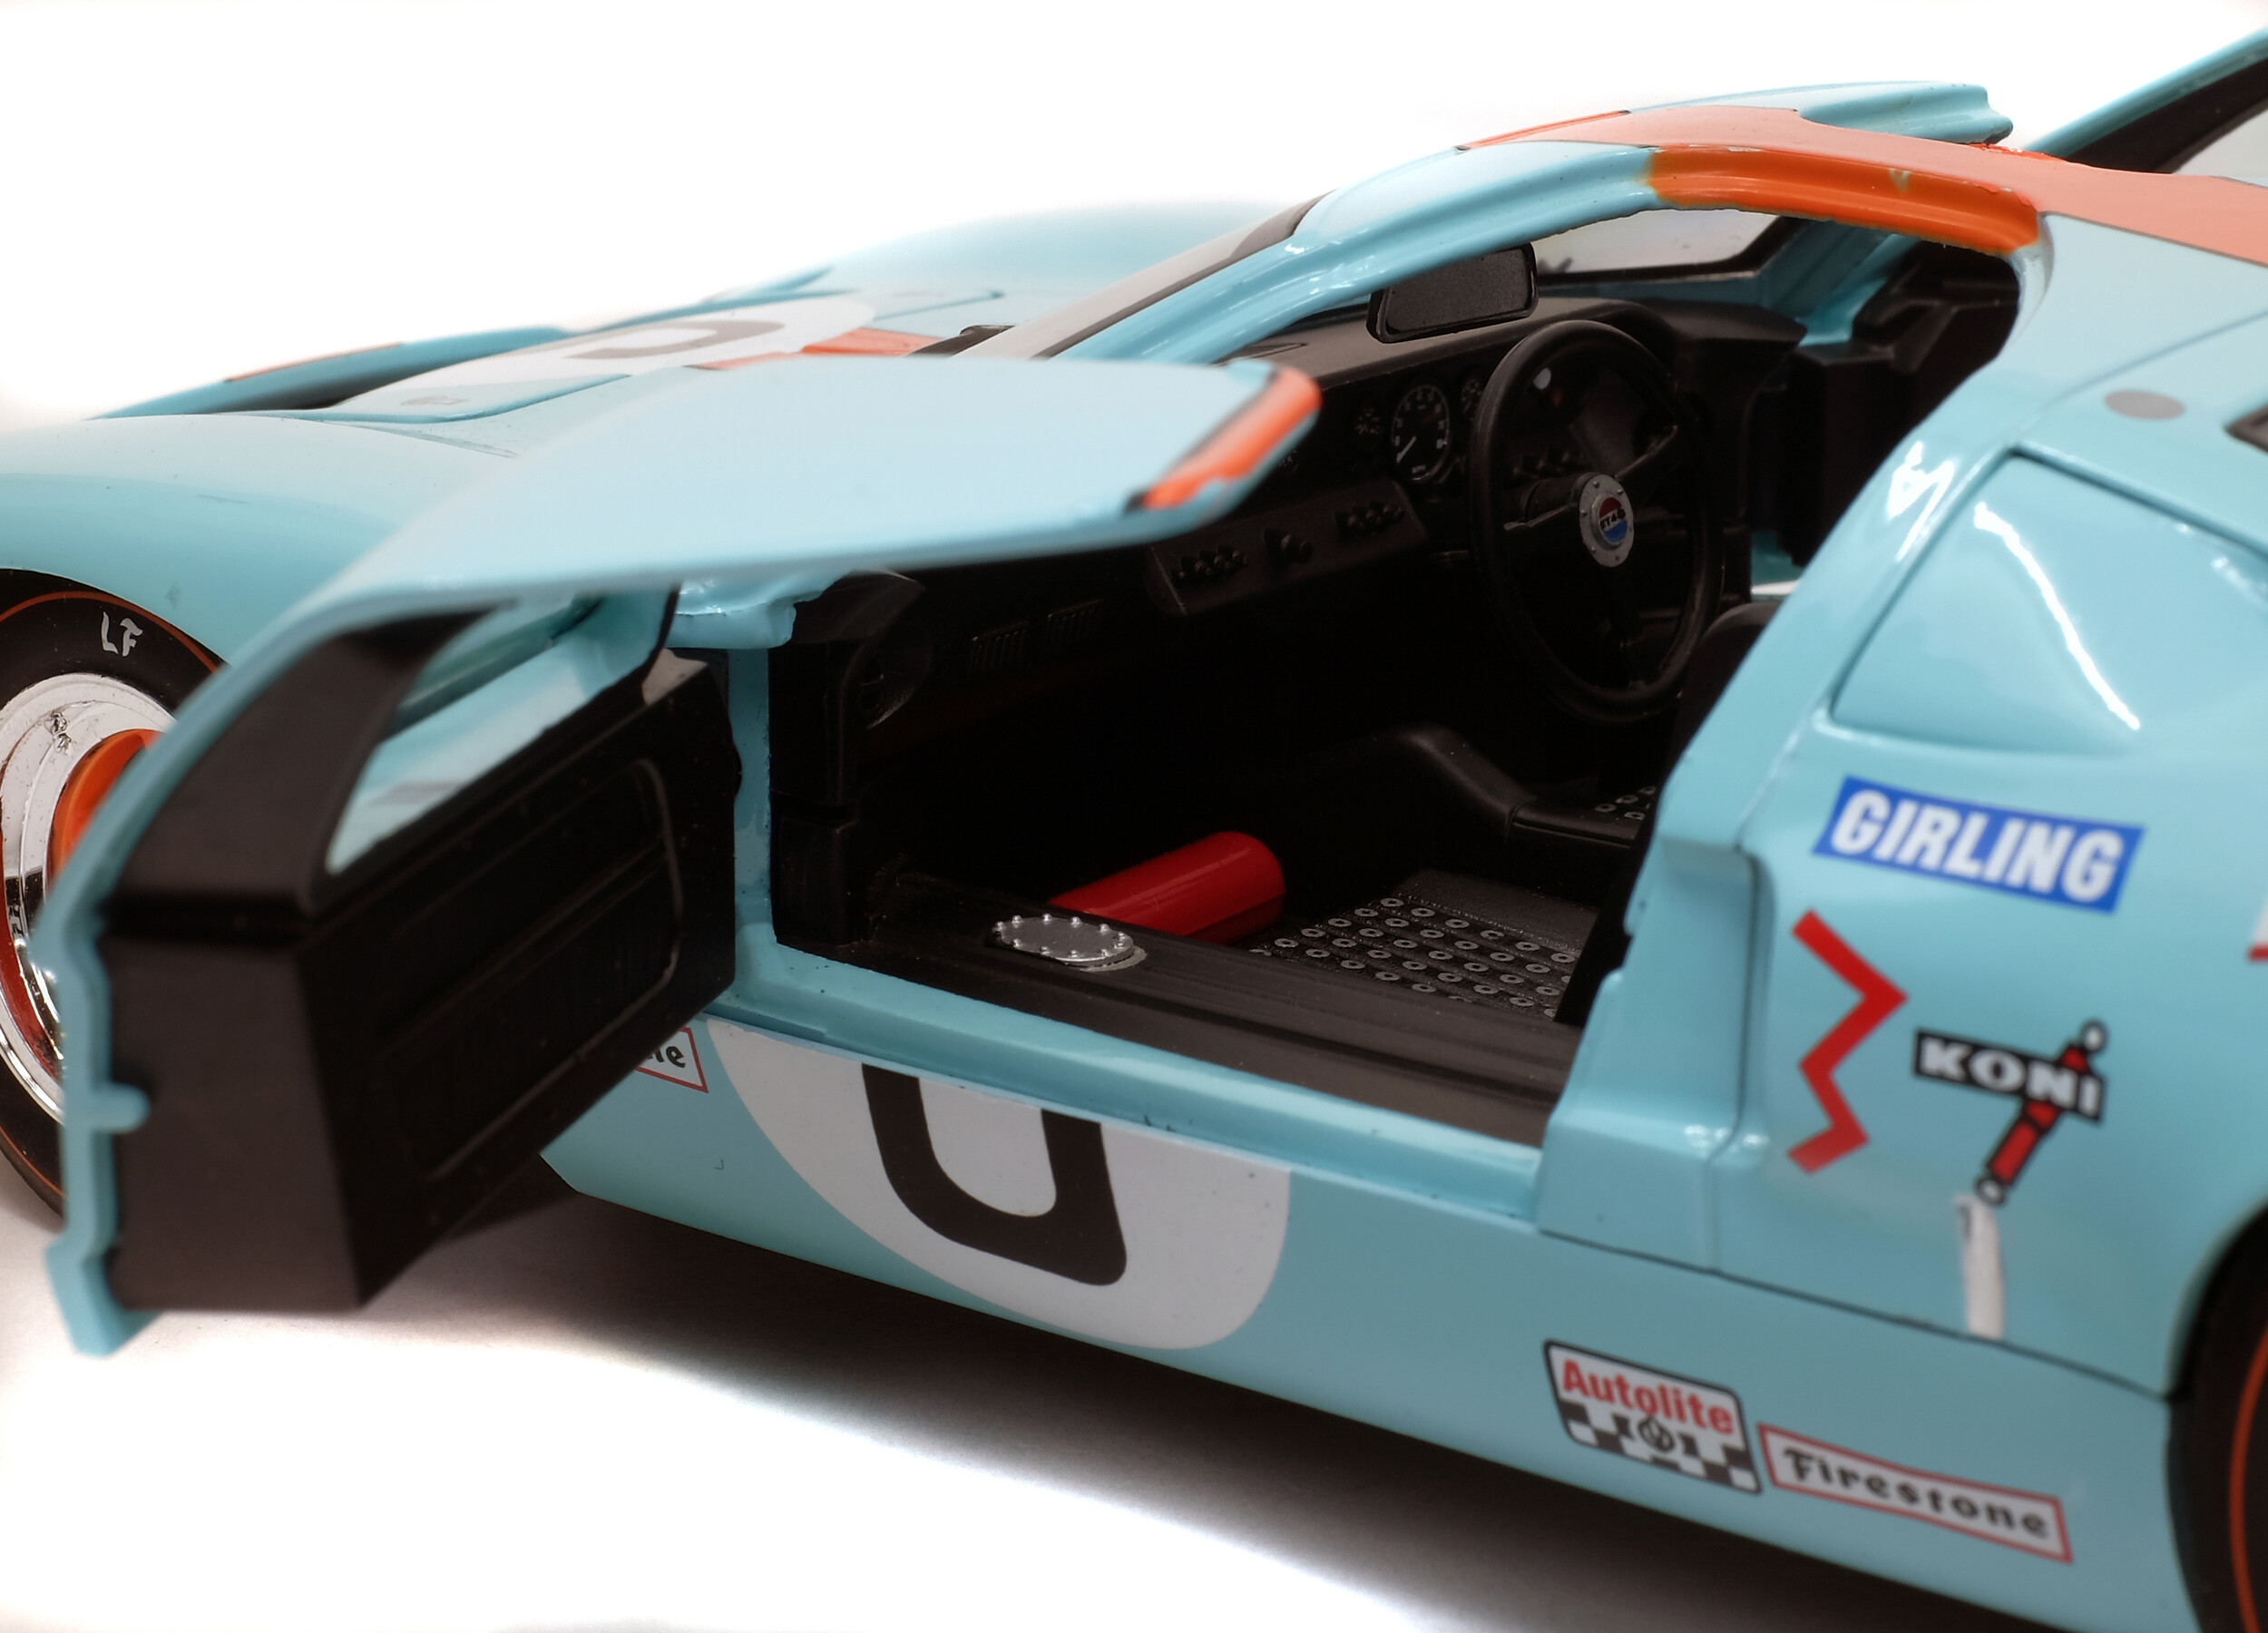 Ford GT40 MKI 1969 Le Mans 1/18 Scale Solido New S1803003 